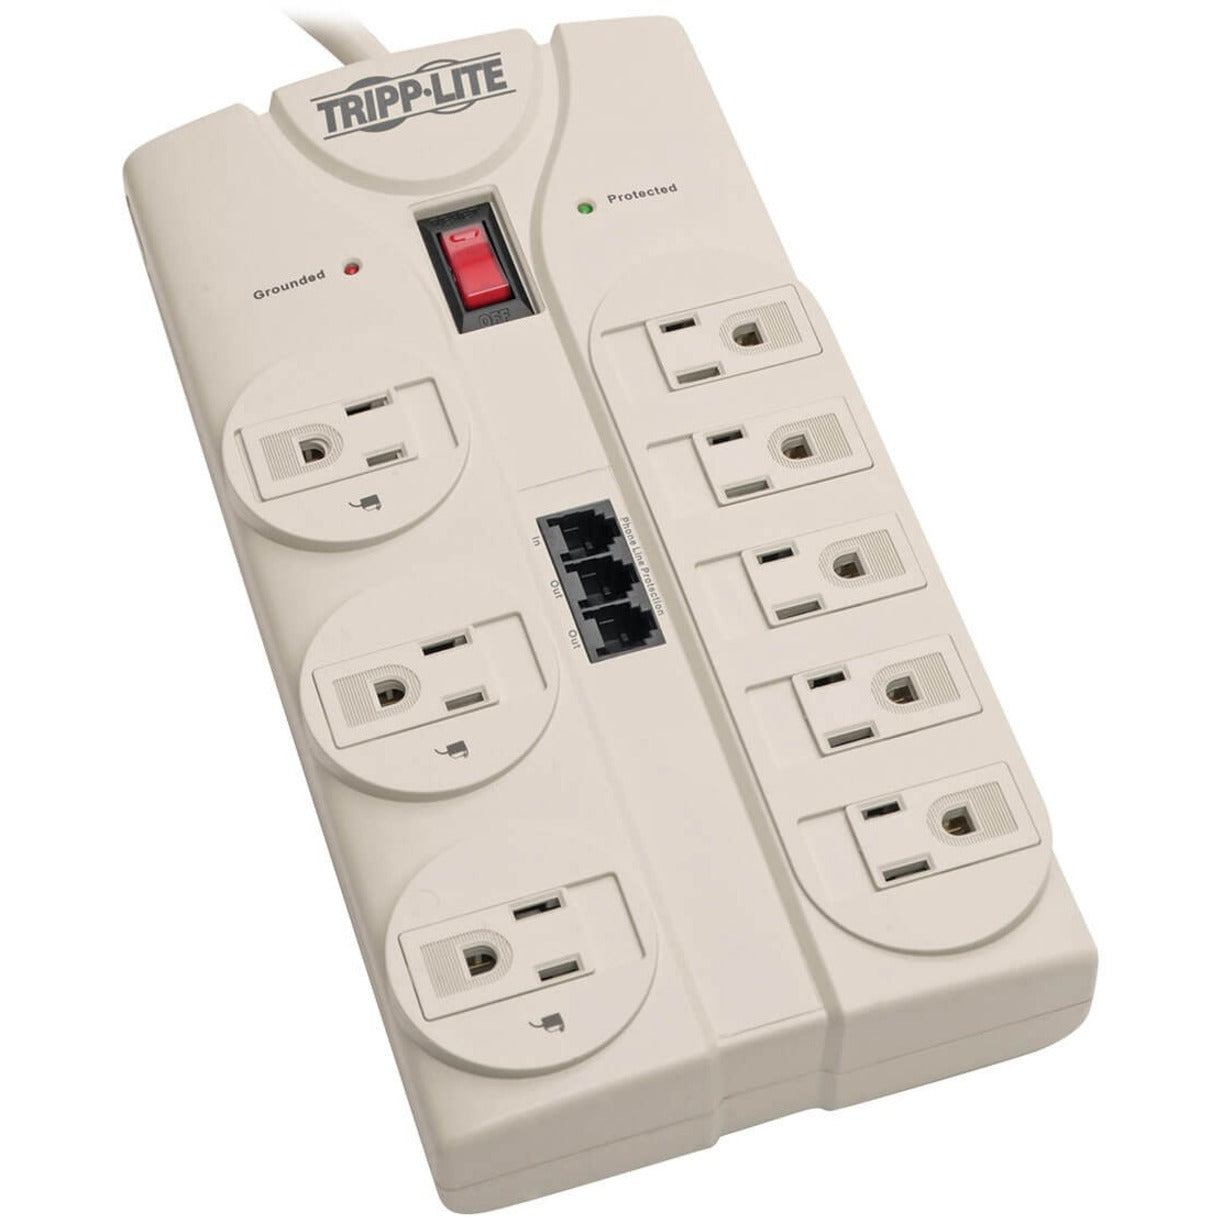 Tripp Lite TLP808TEL Protect It 8-Outlet Surge Suppressor, 2820 Joules, 8' Cord